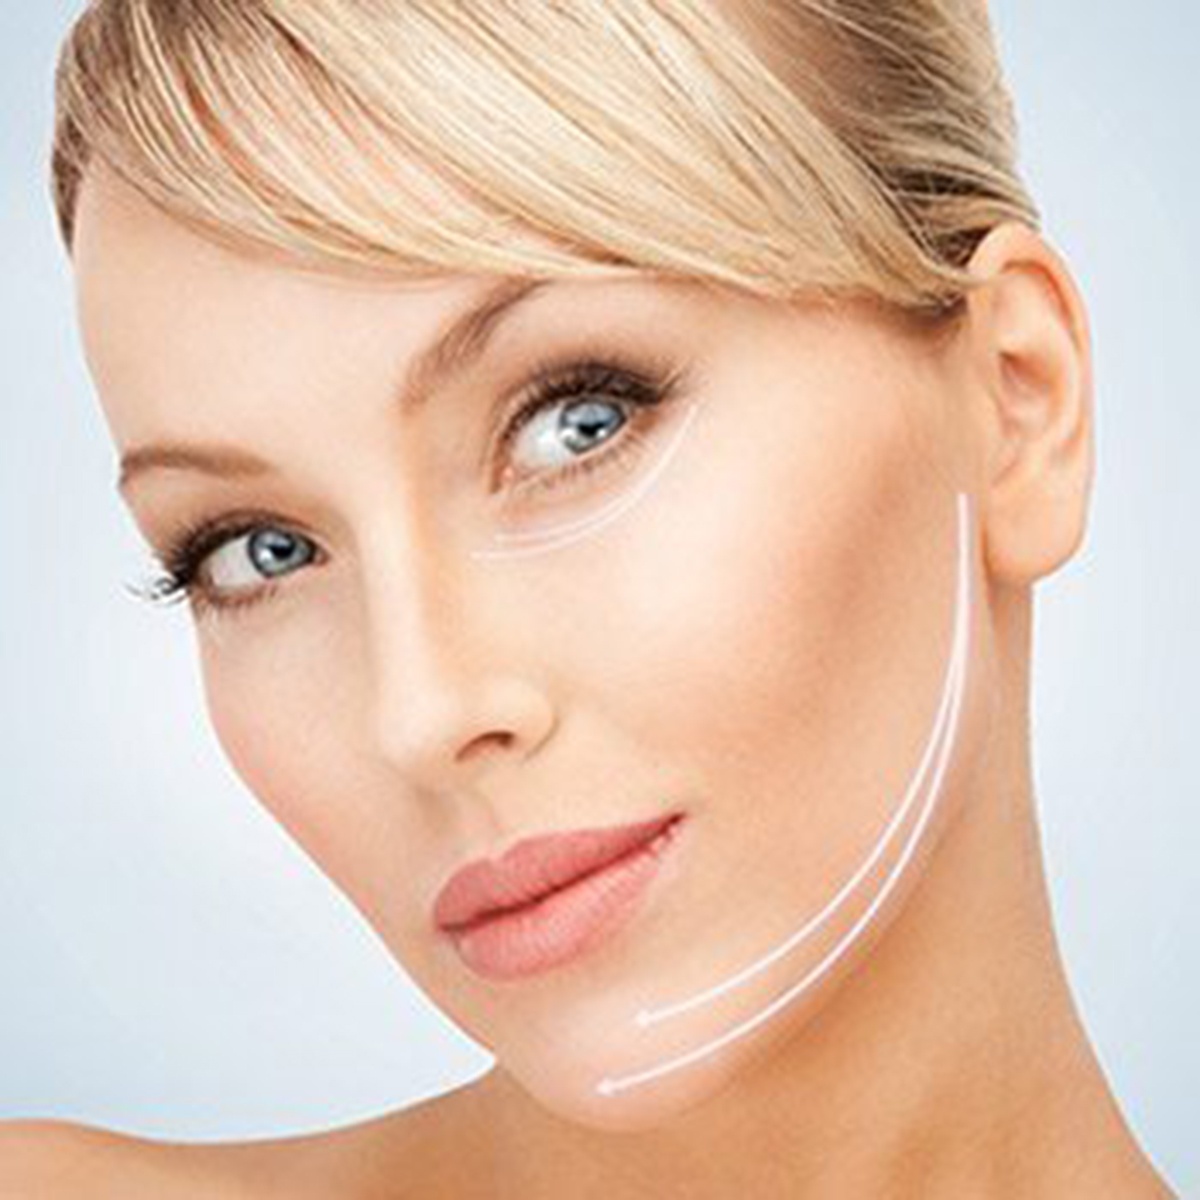 Where to get fractional laser and resurfacing